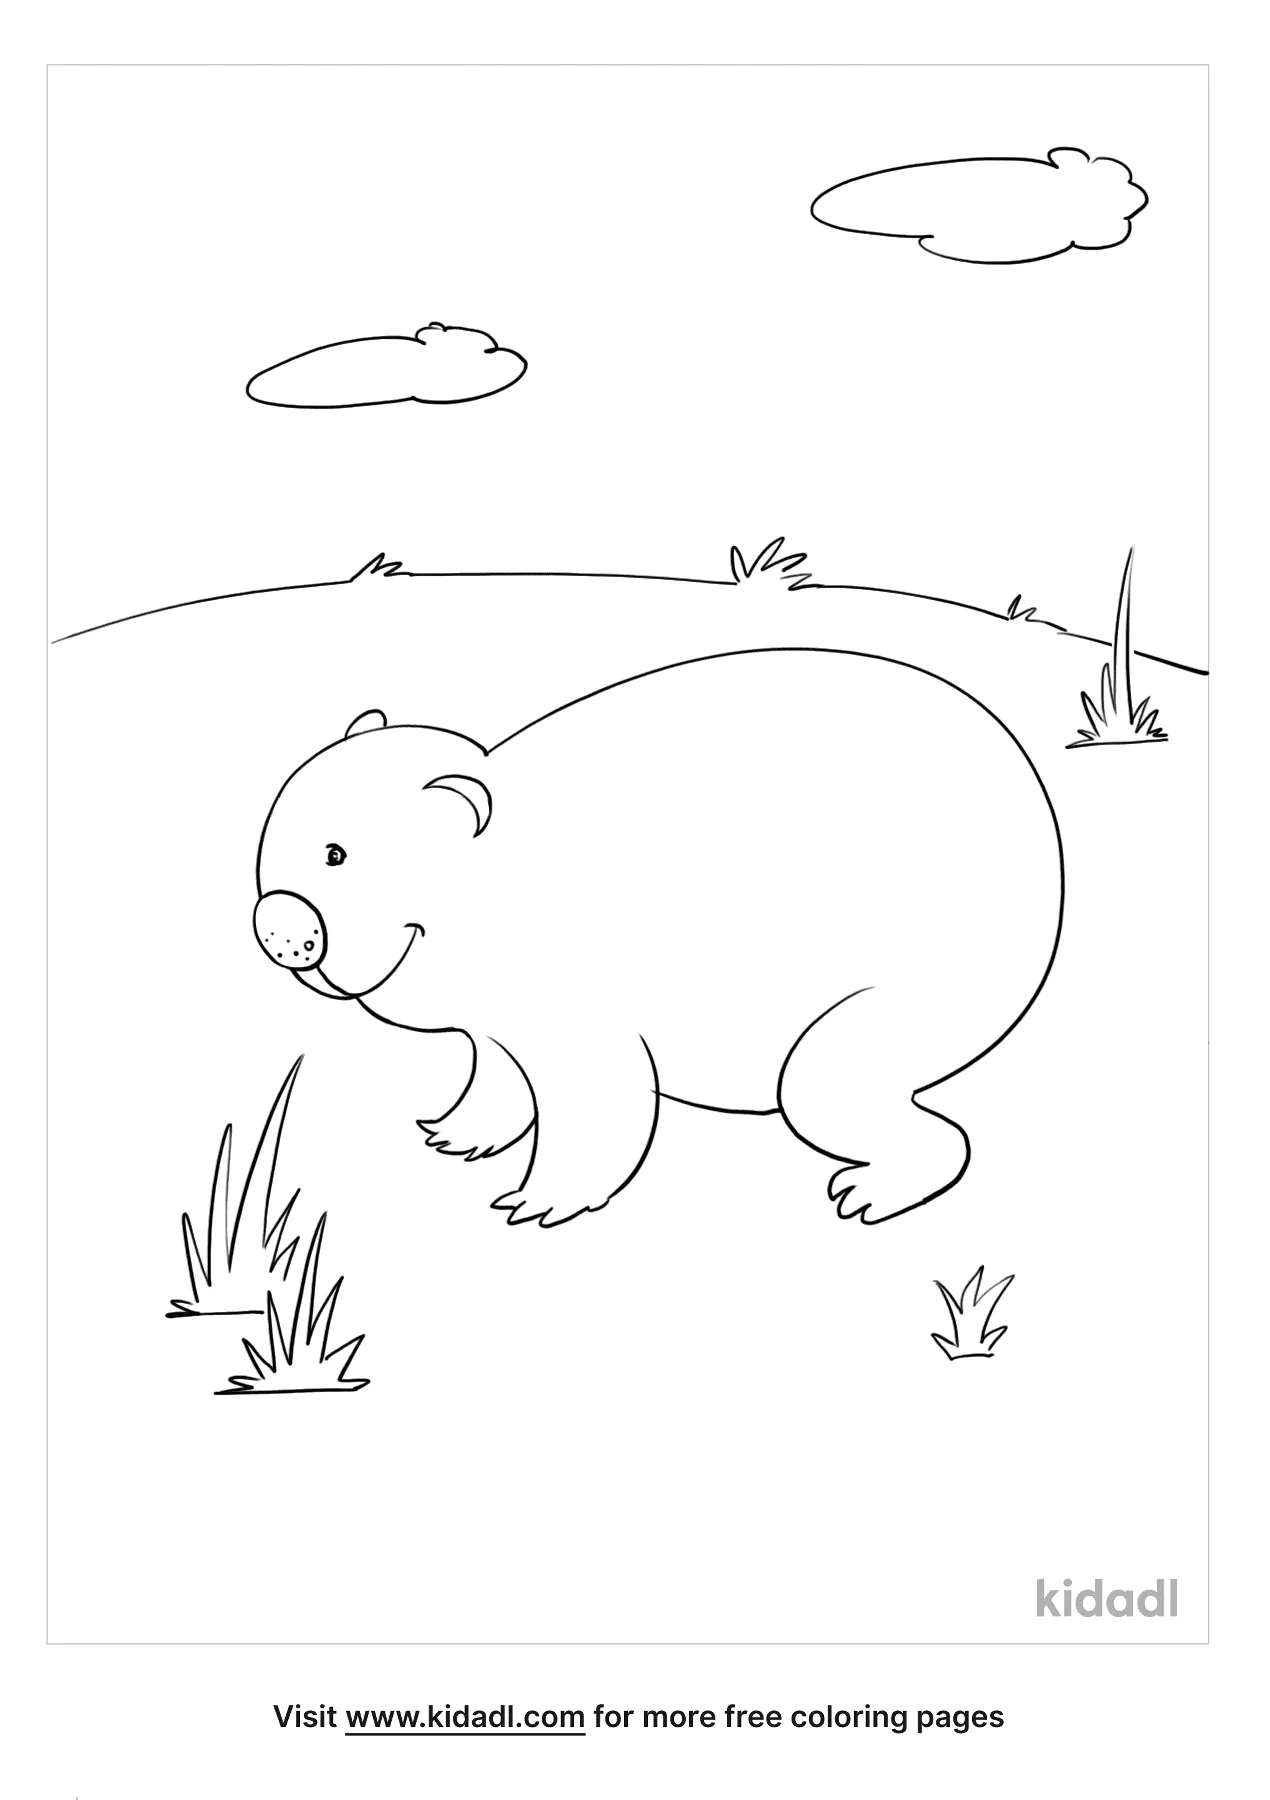 Australian Animals Coloring Pages   Free Australian Coloring Pages ...